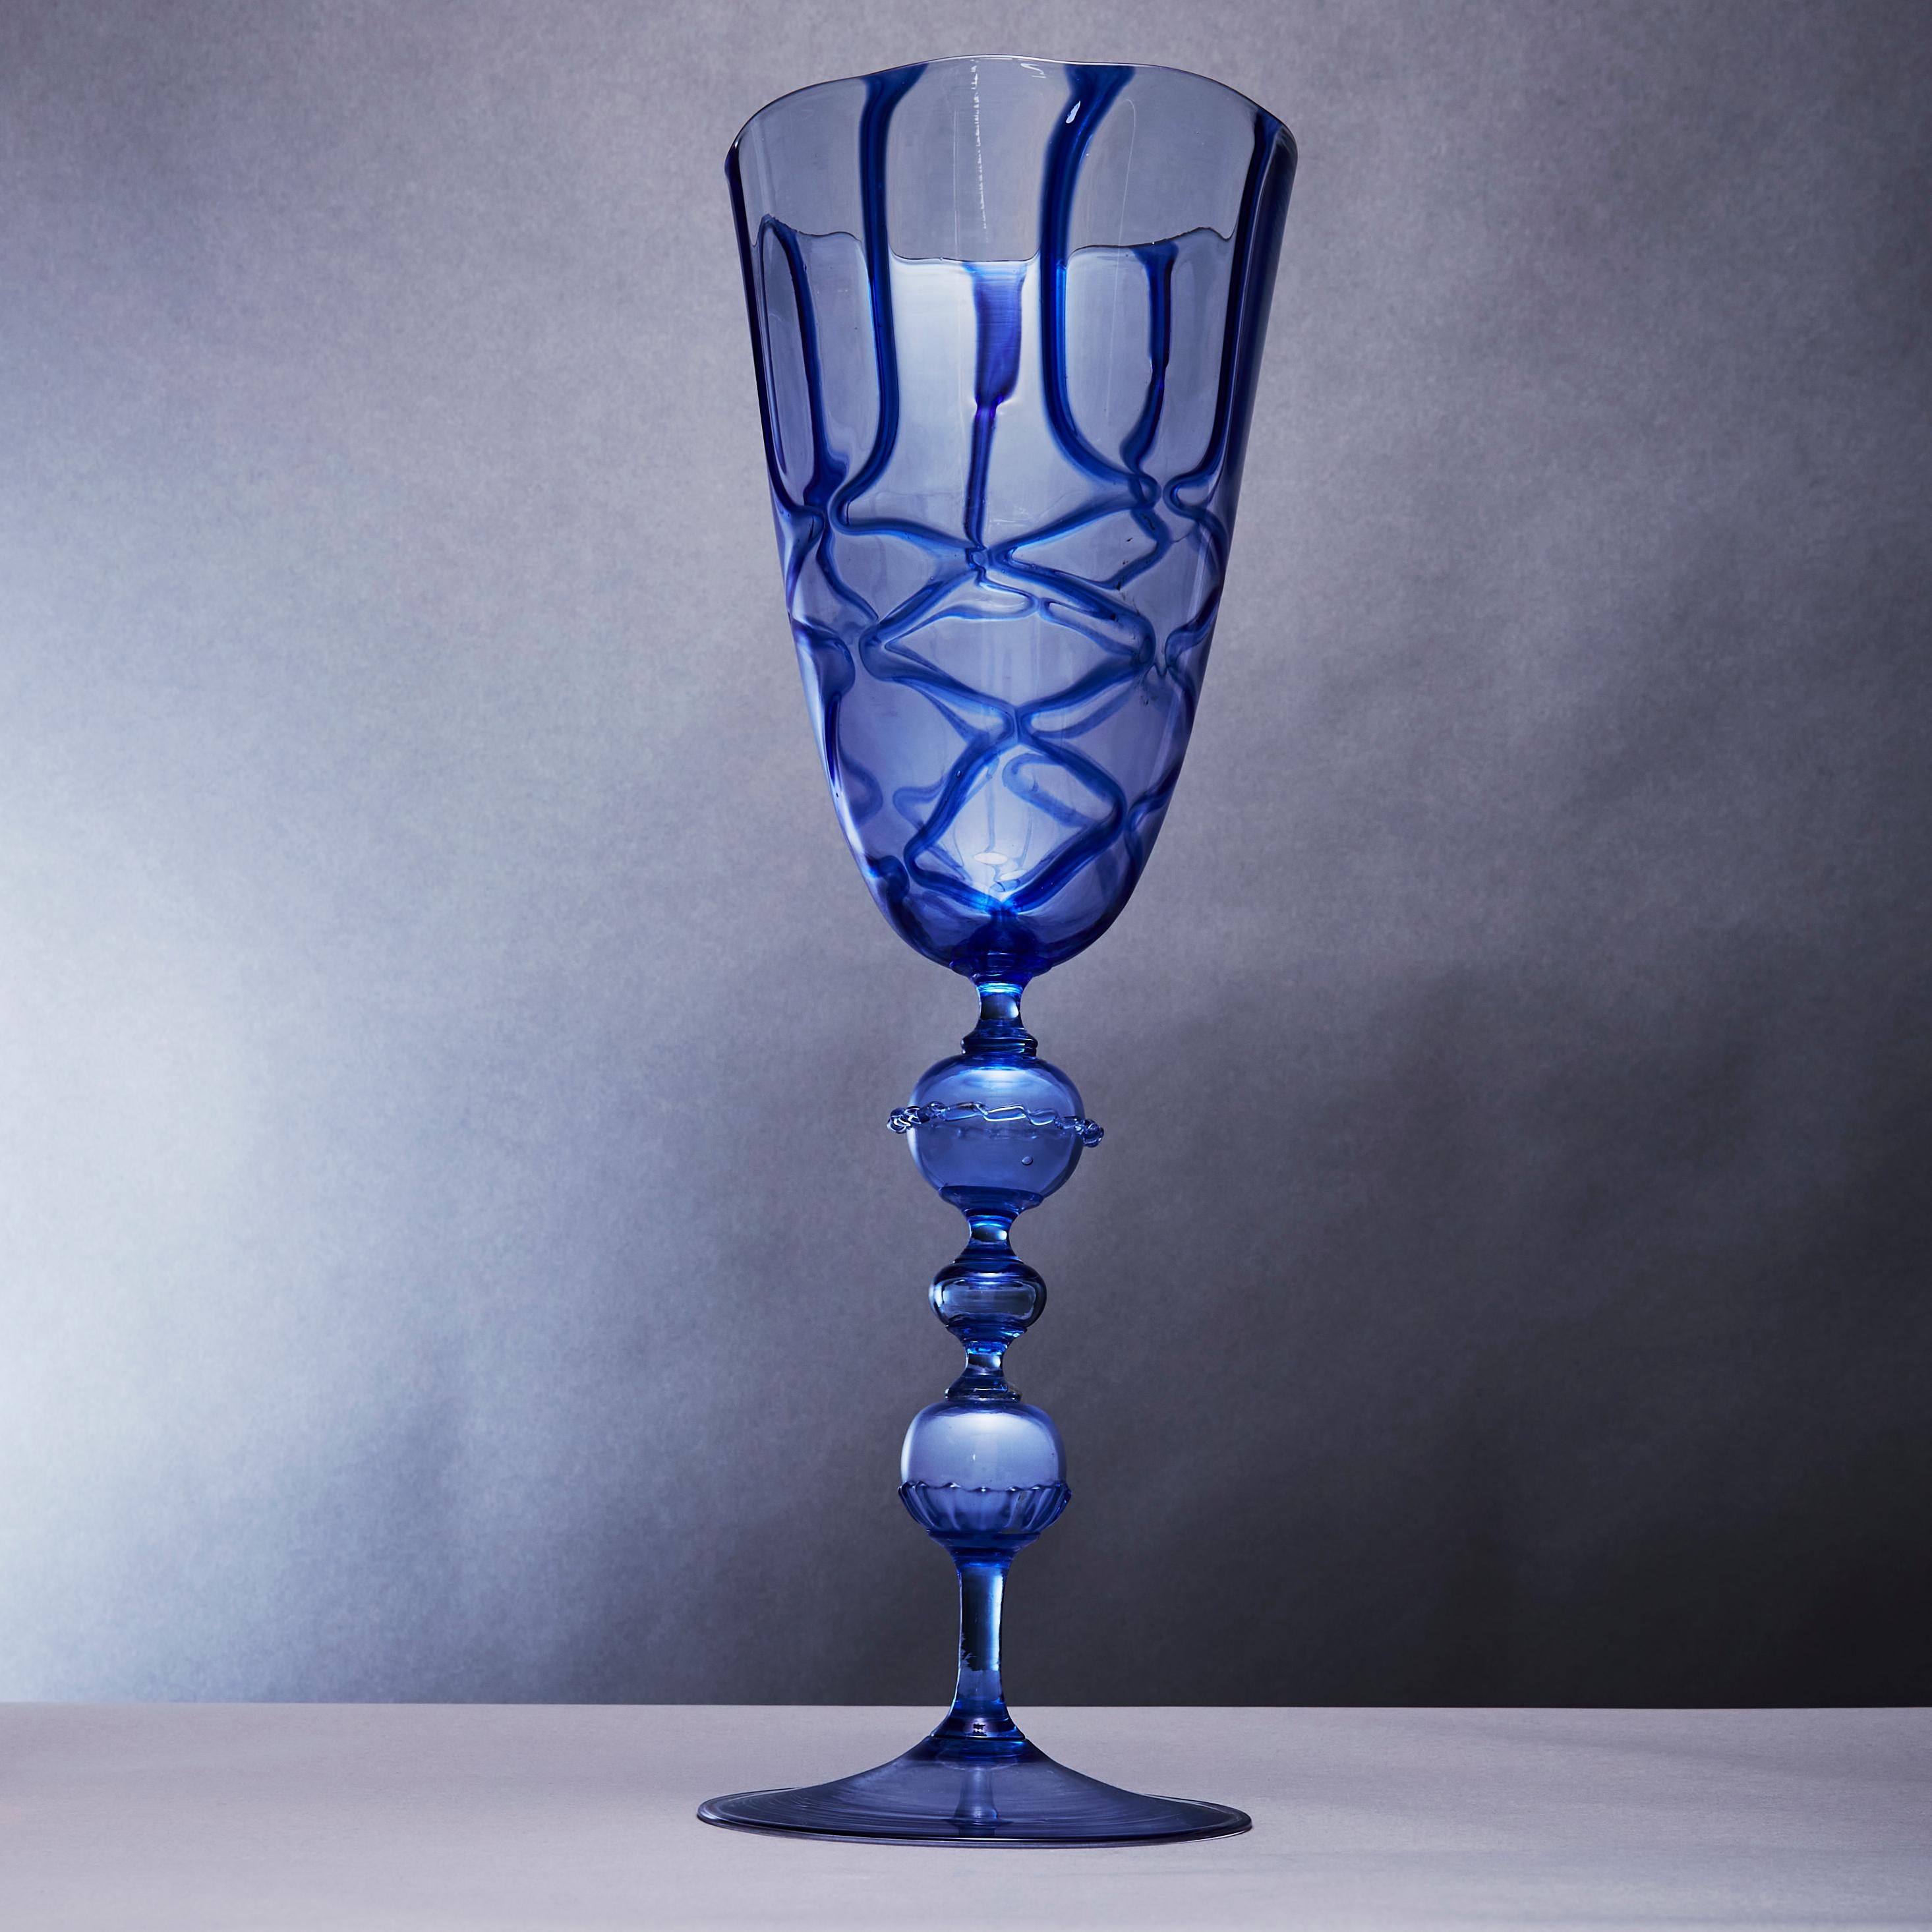 Large Chalice sapphire clear blue applied pattern on translucent blown glass attributed to Artistica Barovier (1919-1936) circa 1920. This goblet sits on a long stem with two decorated glass balls and a small central glass ball resting on a splayed